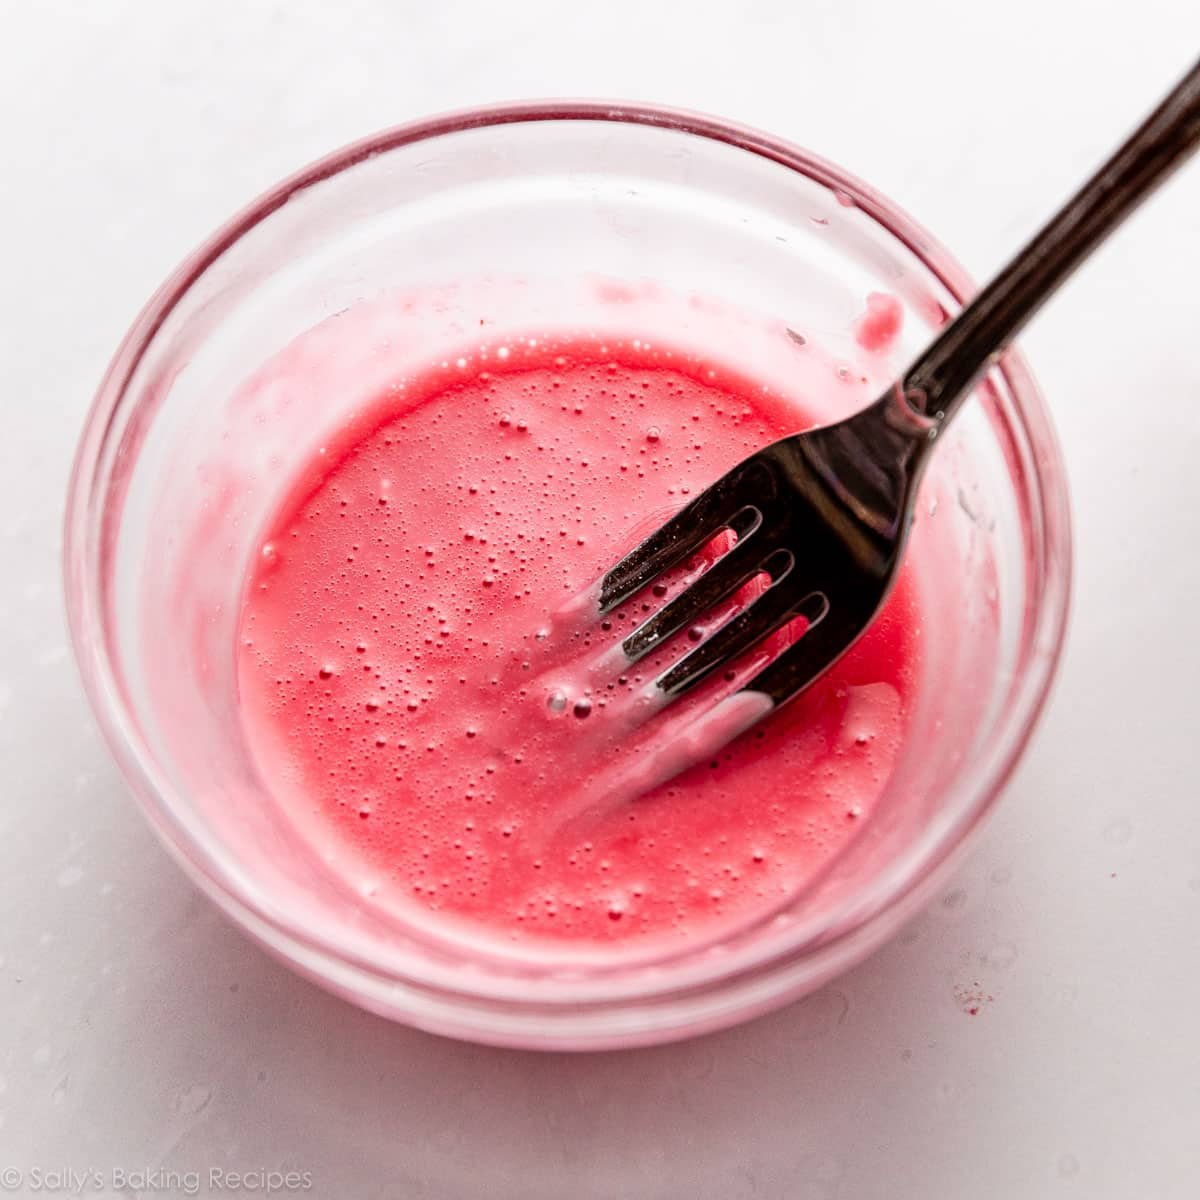 fork mixing a pink mixture in a small glass bowl.